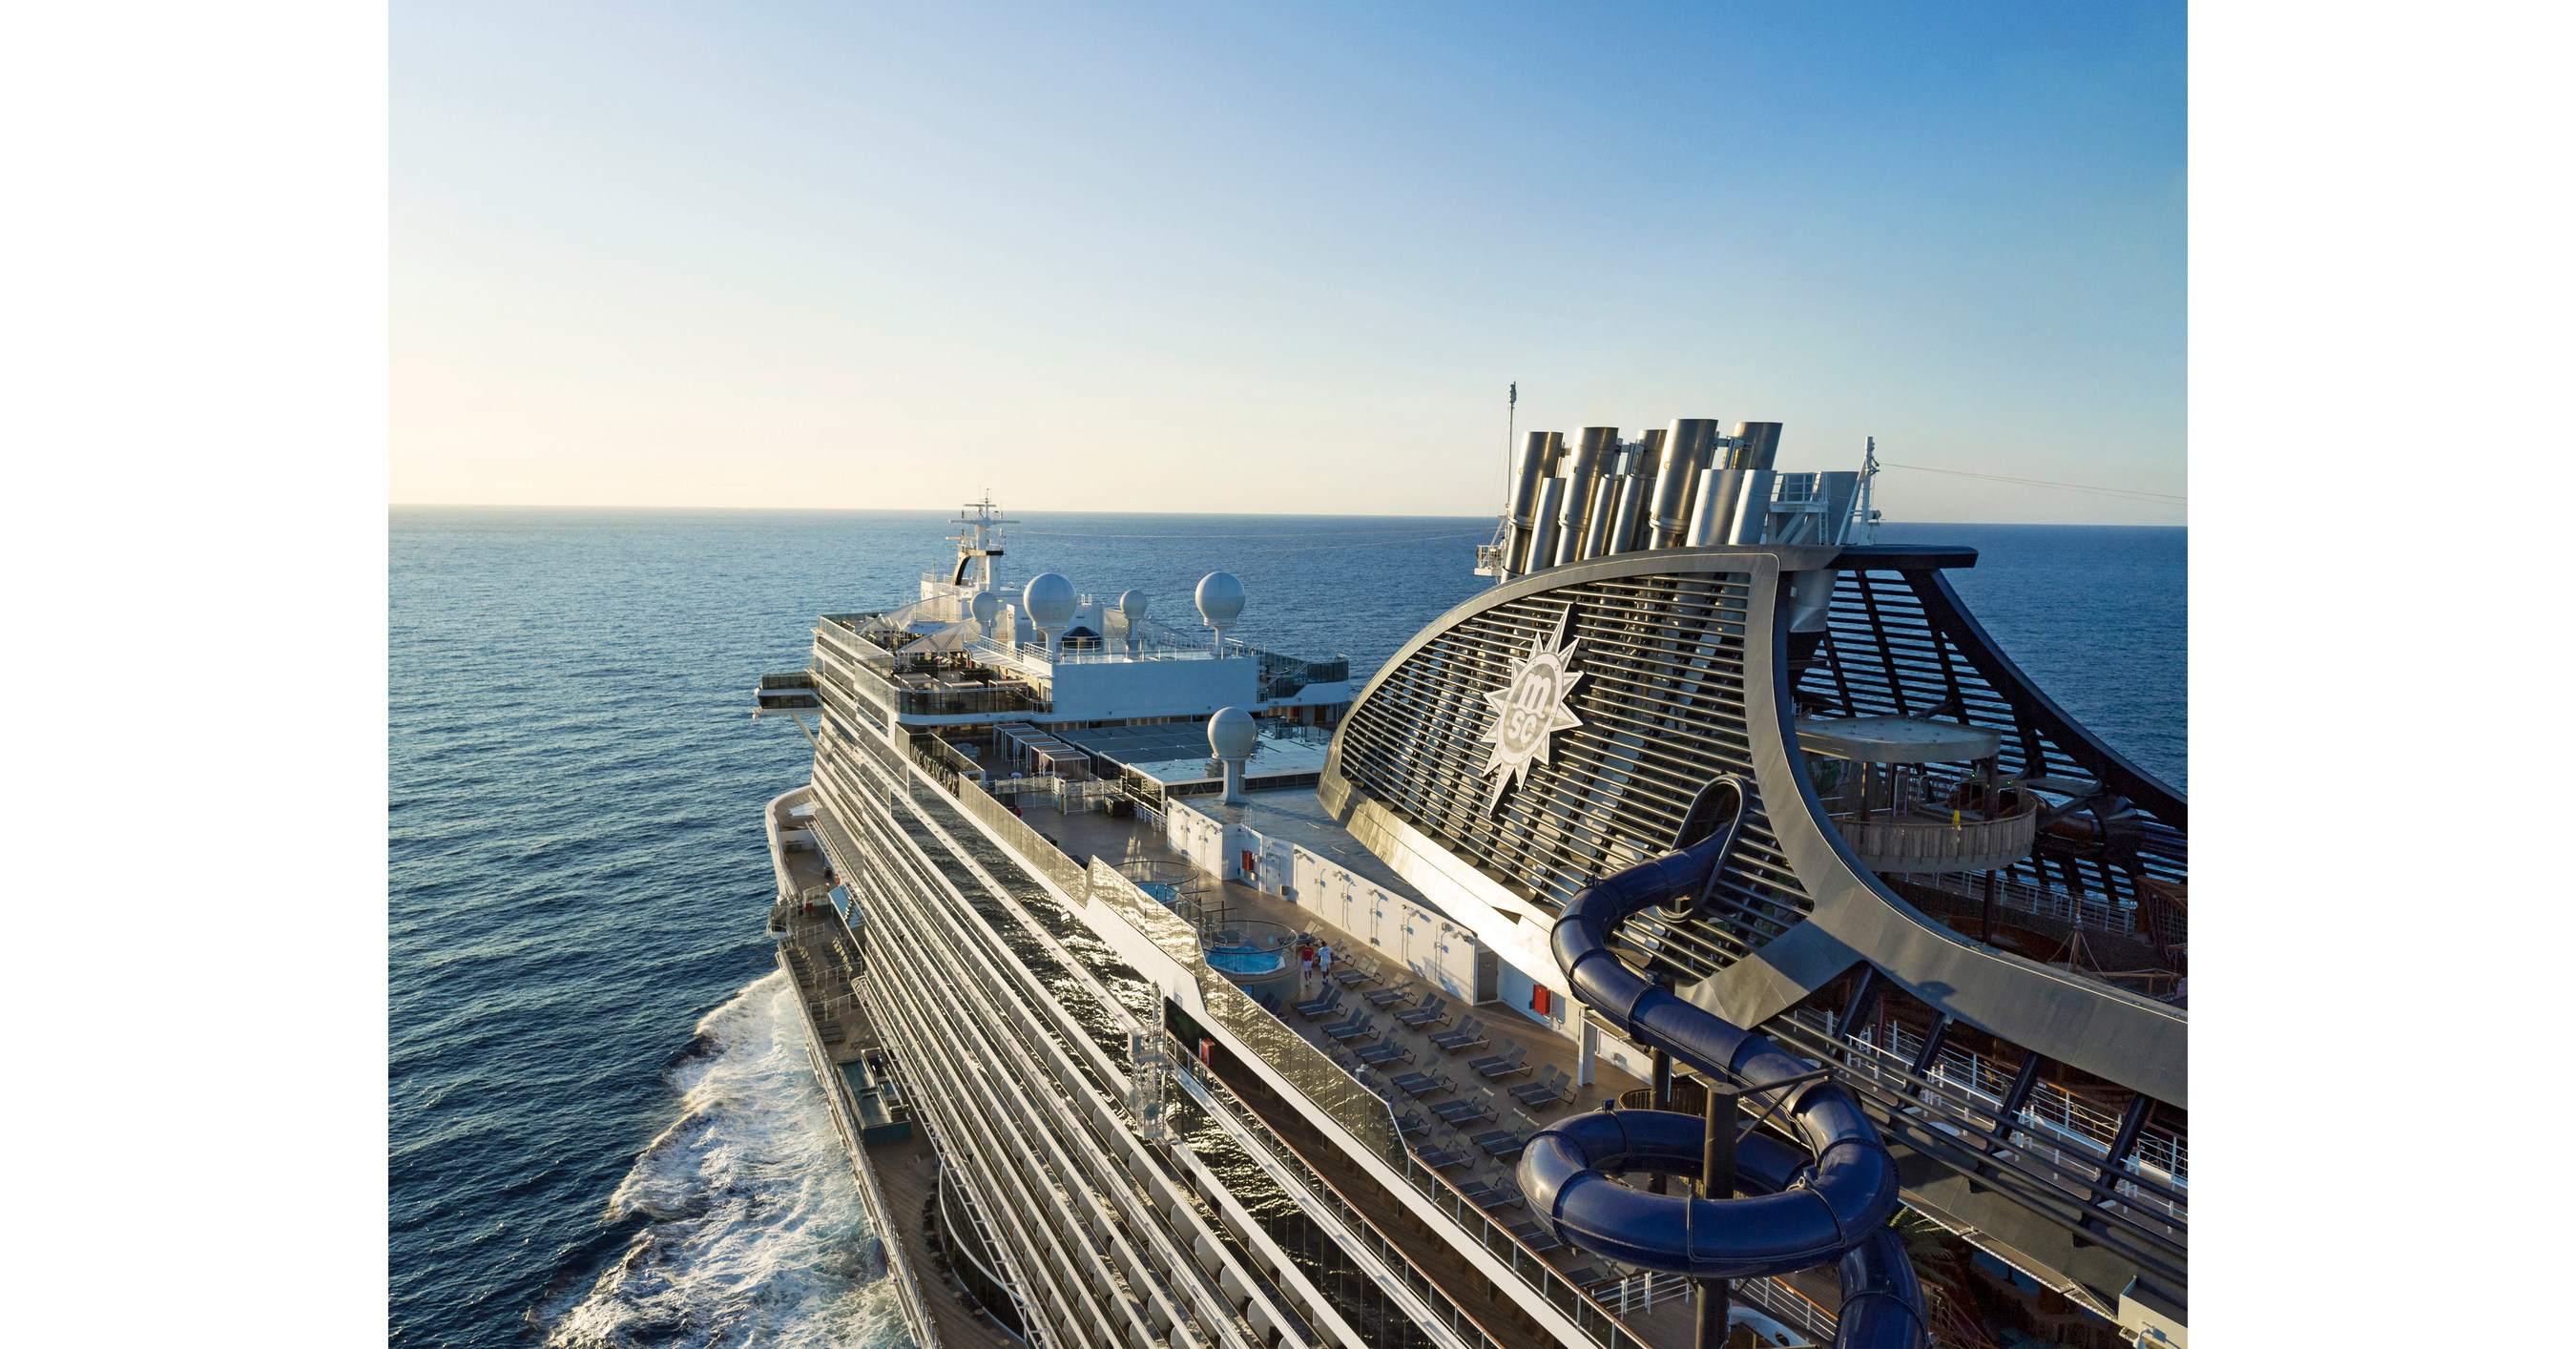 MSC CRUISES PLANS LARGESTEVER U.S. PRESENCE WITH FIVE SHIPS FOR WINTER